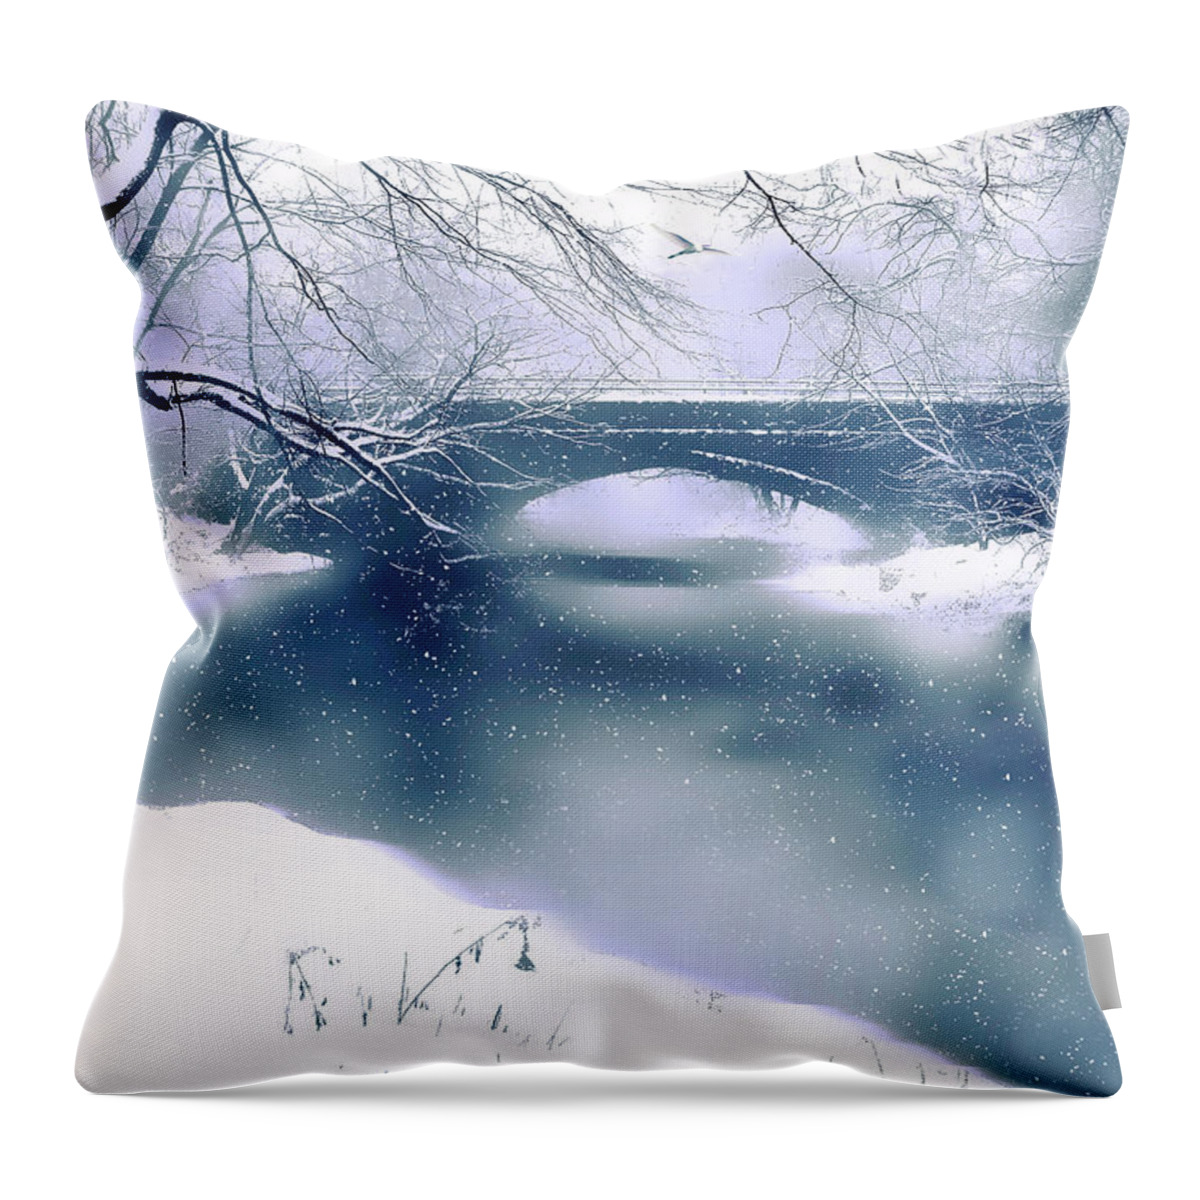 Winter Throw Pillow featuring the photograph Winter Haiku by Jessica Jenney